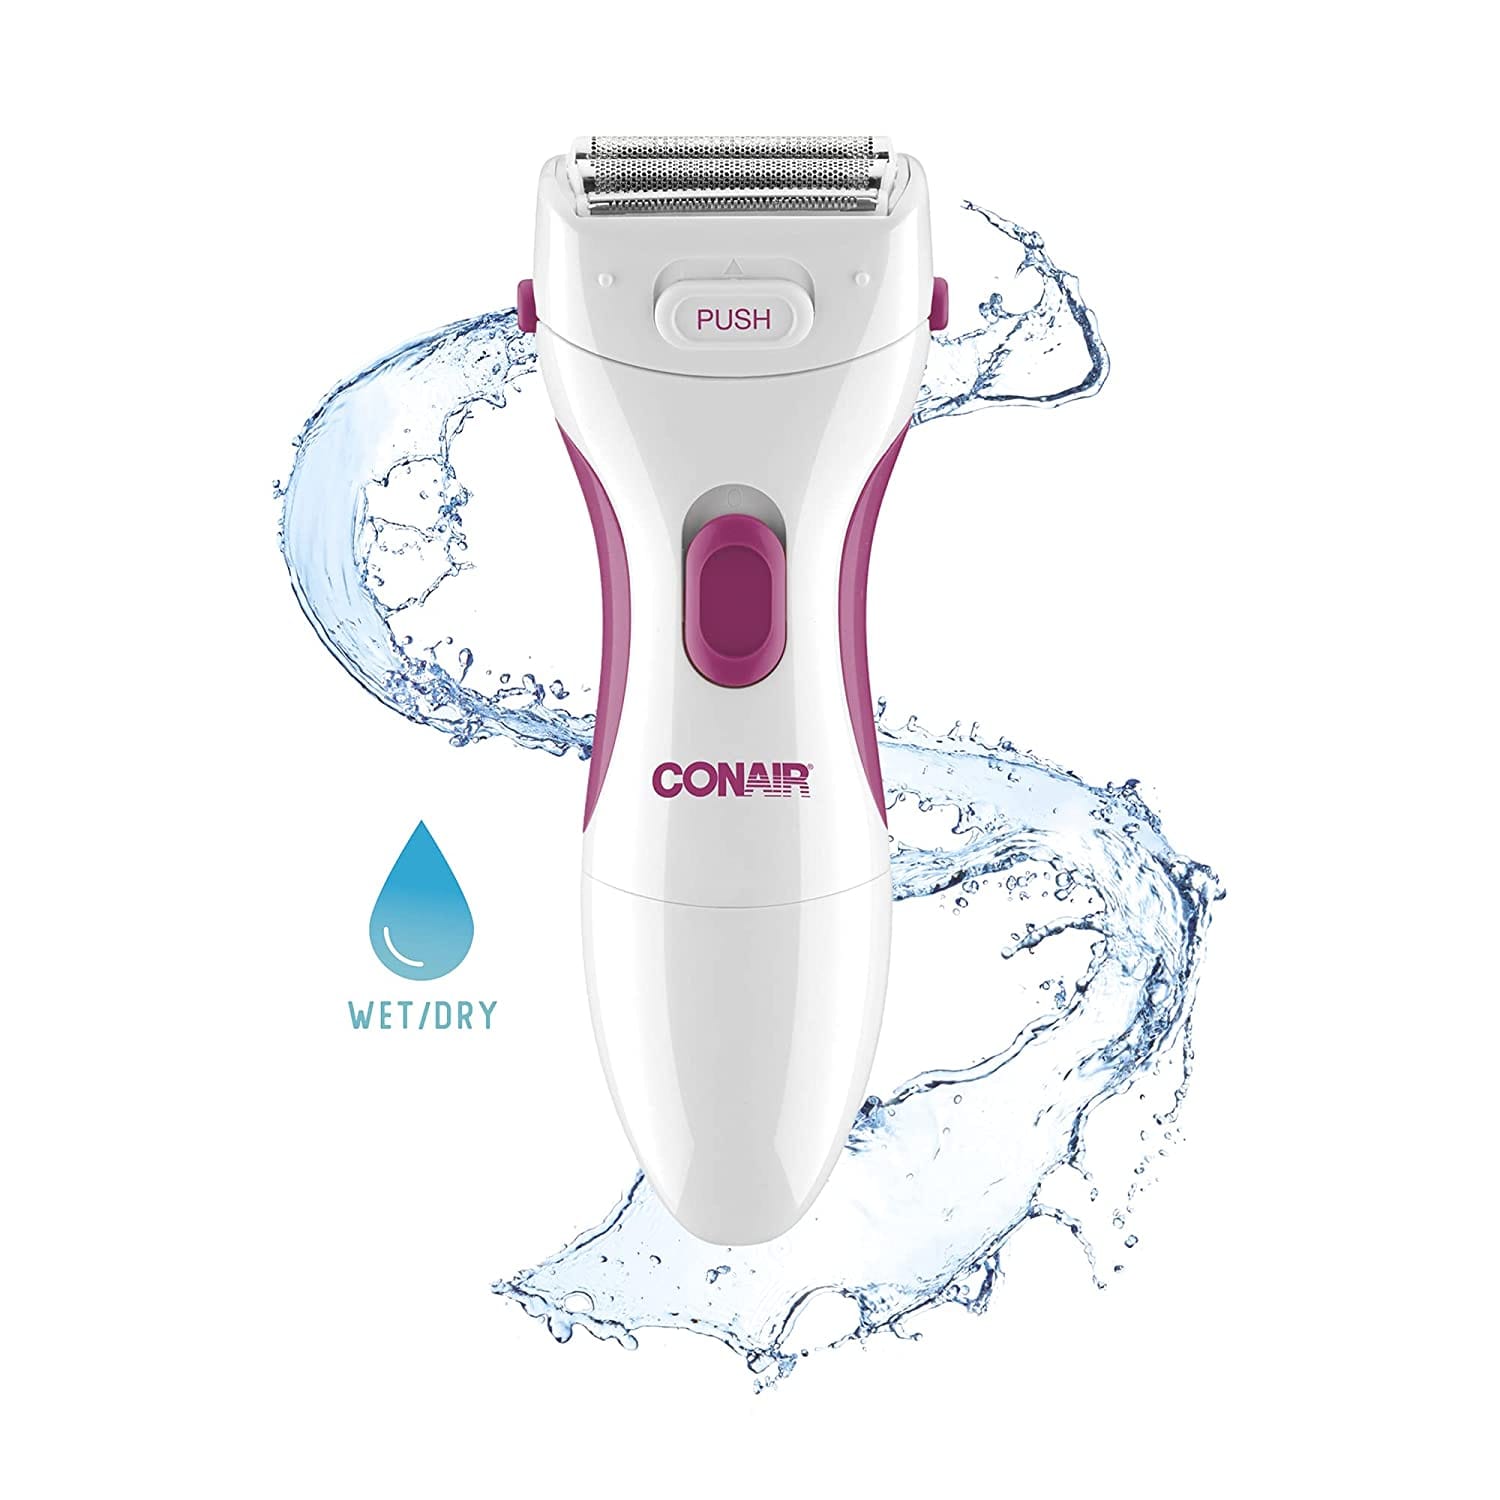 Conair Ladies Cordless Twin Foil Shaver with Pop-Up Trimmer - LWD1RN